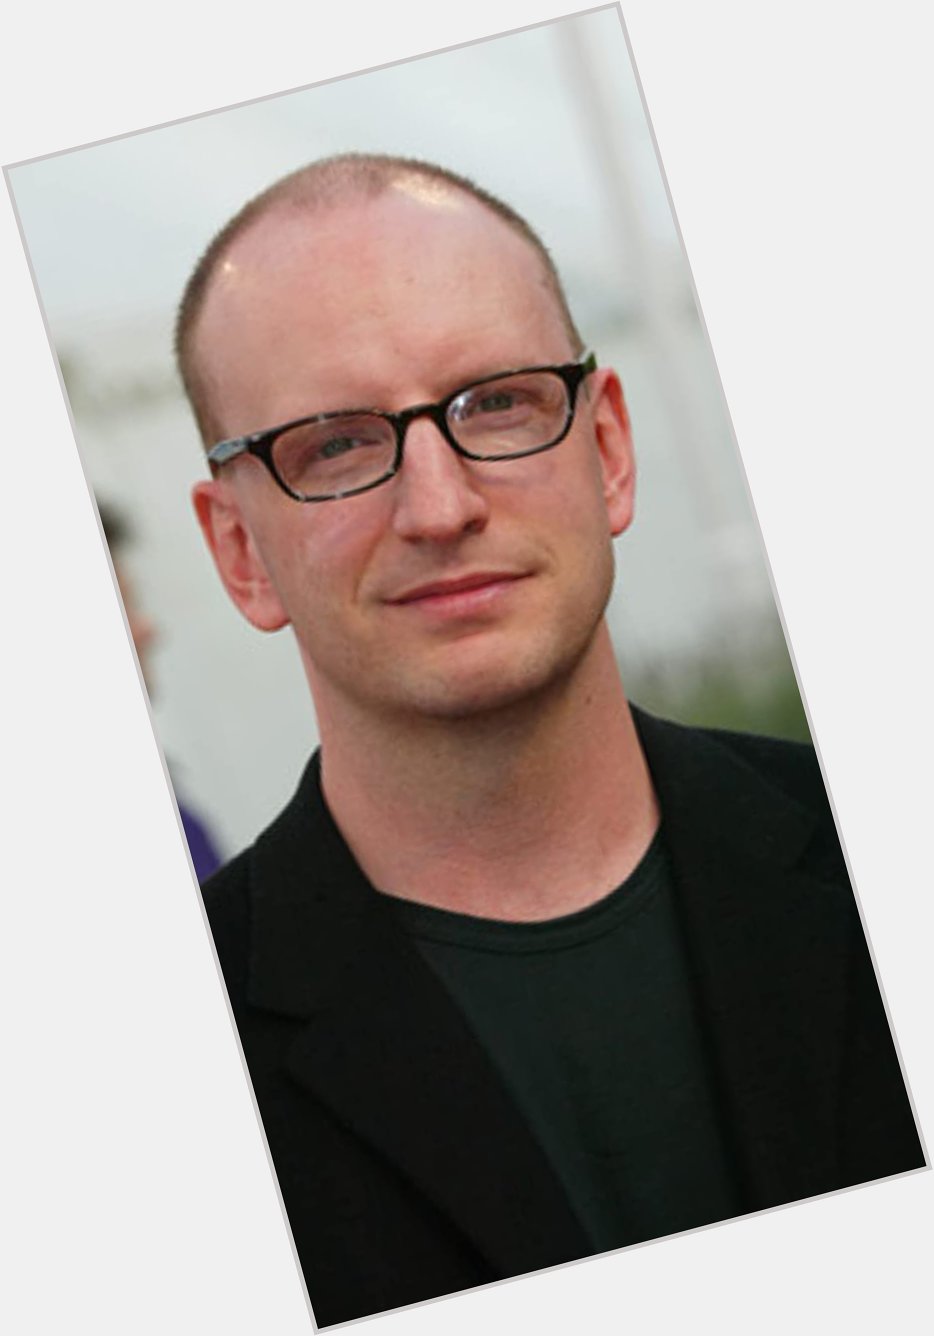 Steven Soderbergh? More like Steven So-Damn-Good-At-Making-Movies!

Happy birthday to the king. 